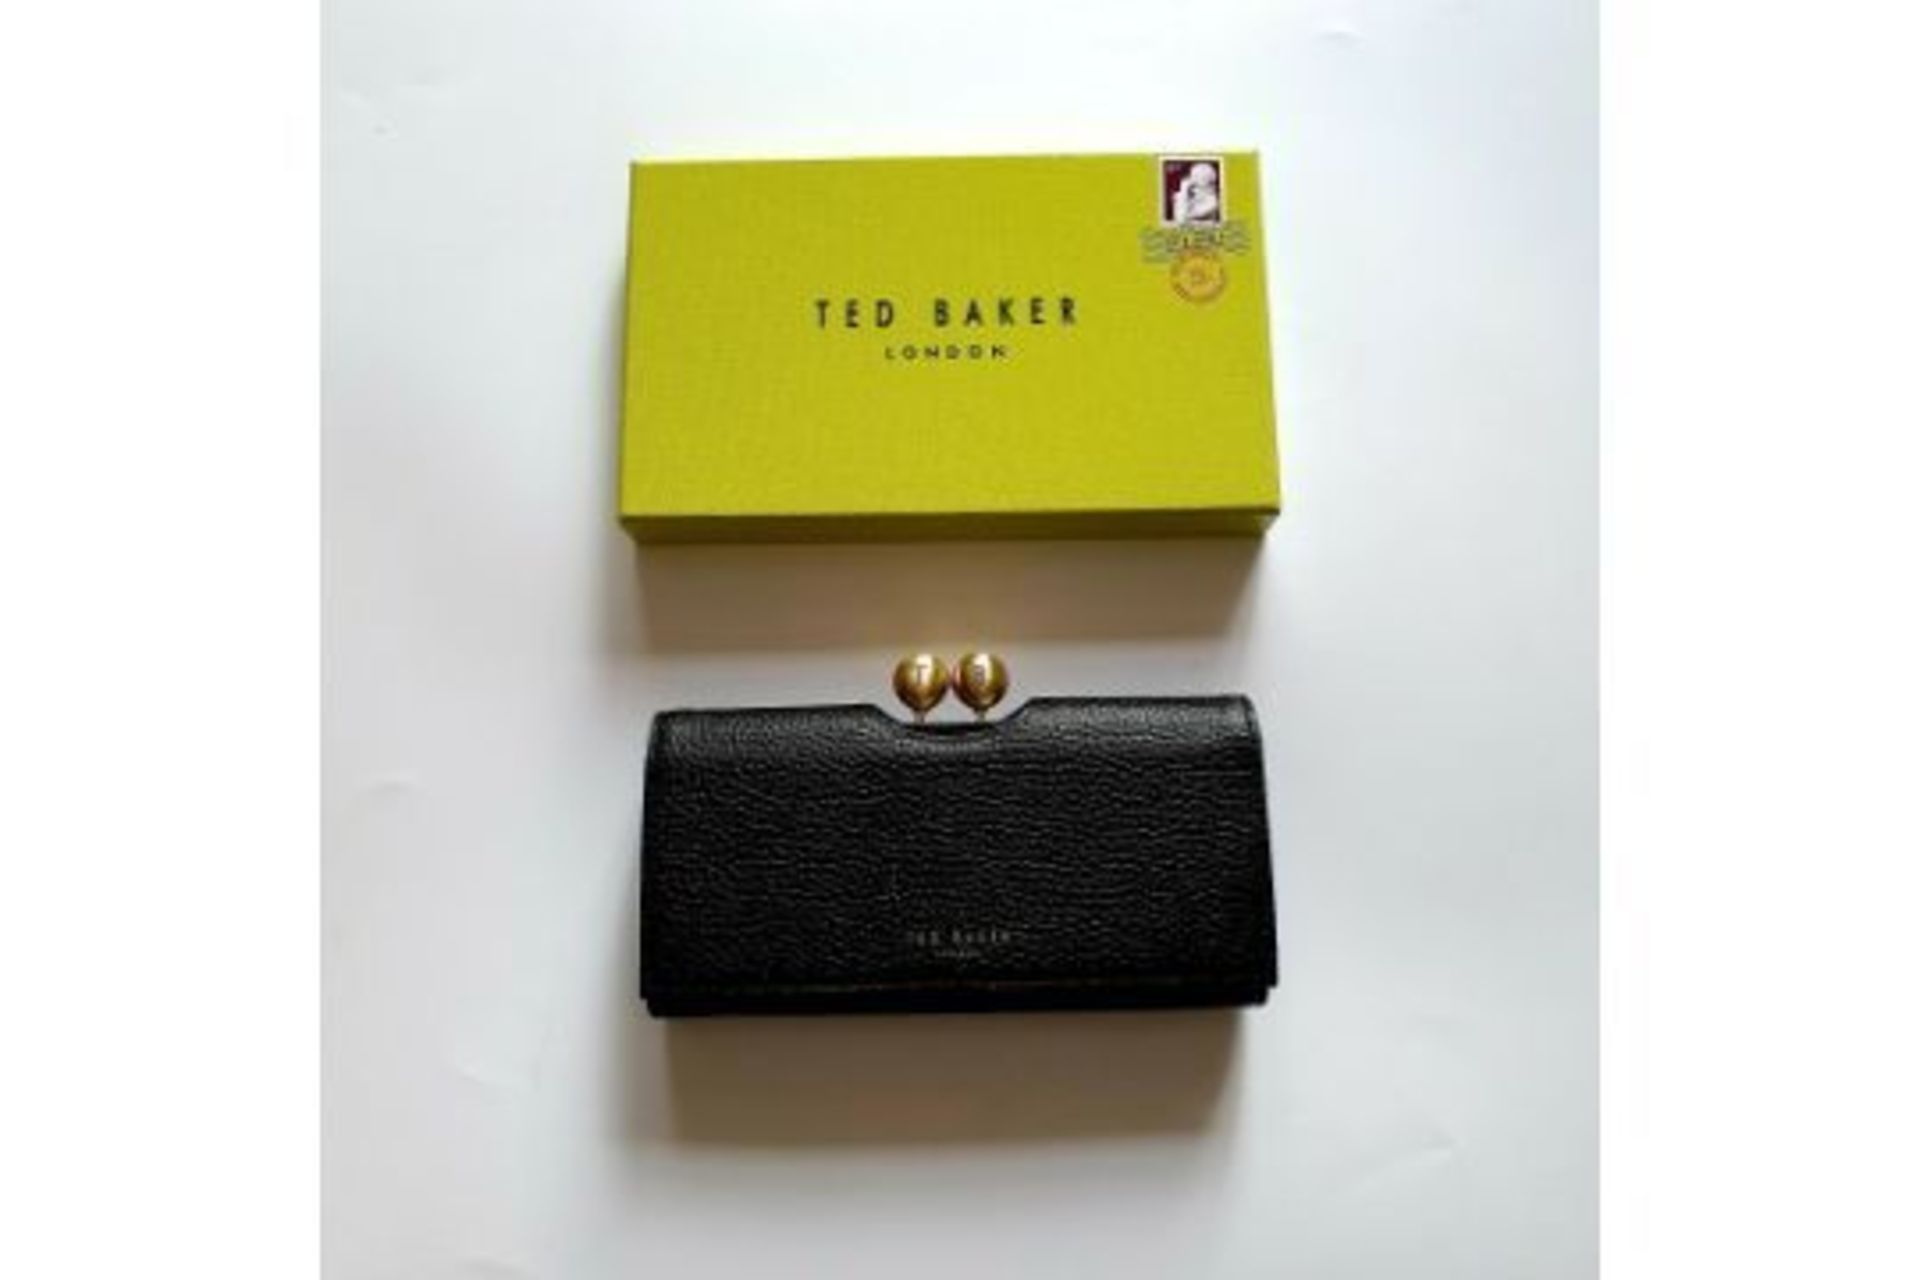 BRAND NEW TED BAKER BLACK SOLANGE TWISTED CRYSTAL BOBBLE MATINEE PURSE (1309) RRP £99 - 12